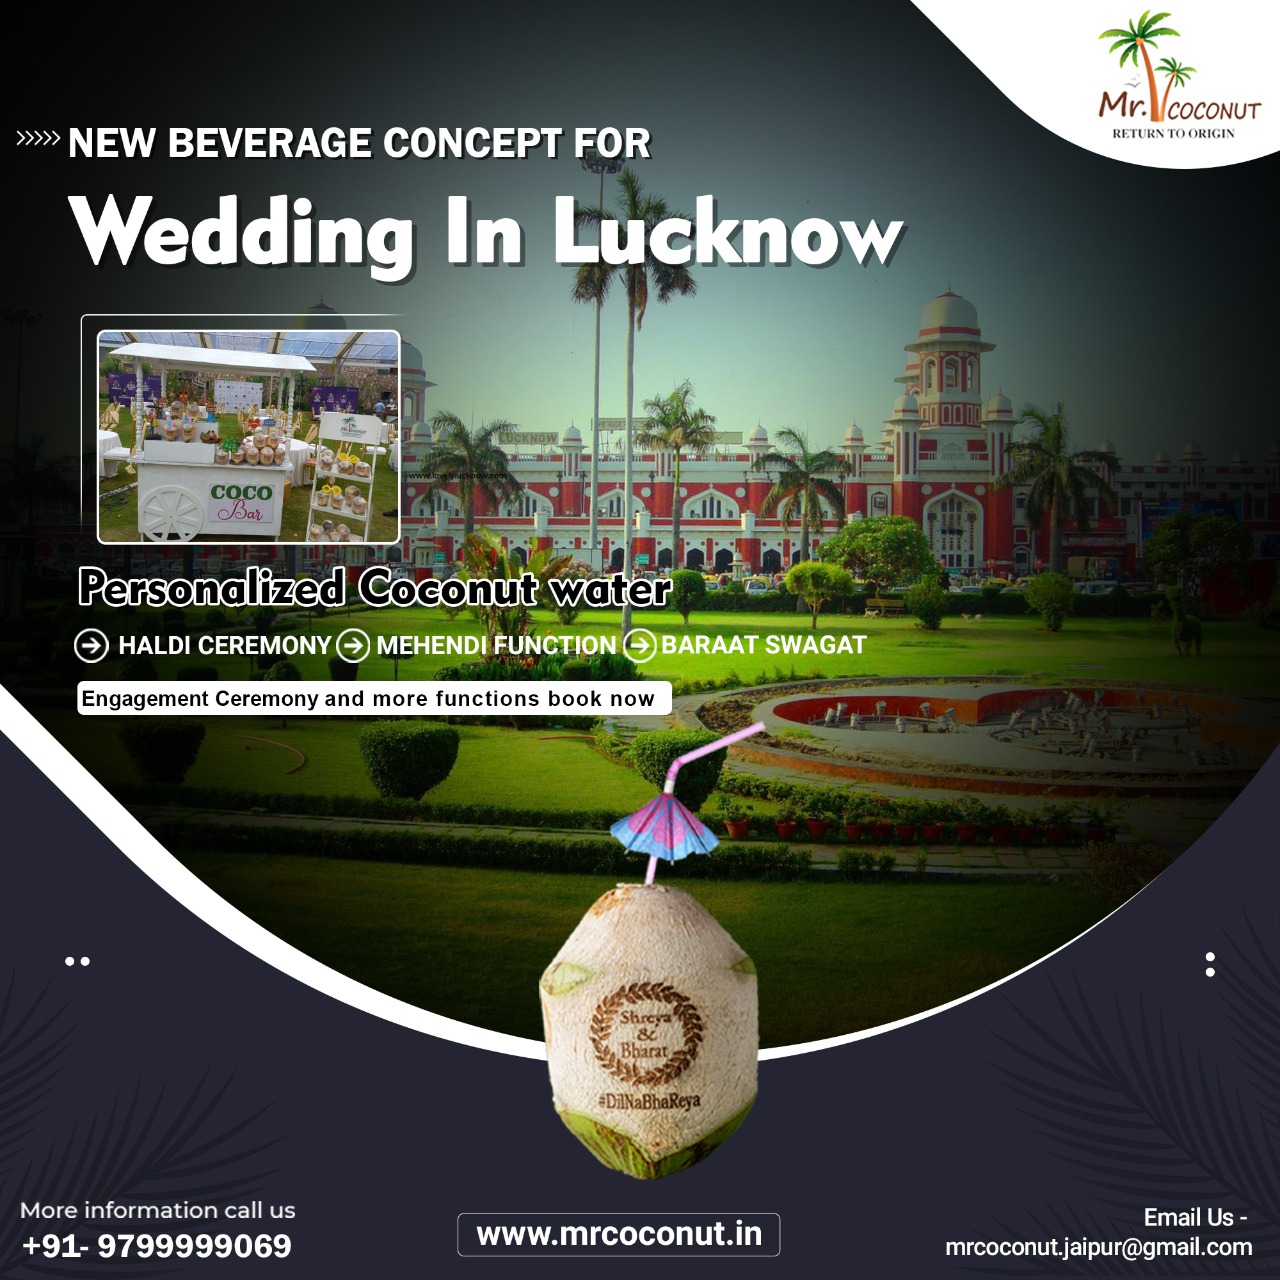 Experience the Nabawi-style destination wedding with Mr. Coconut